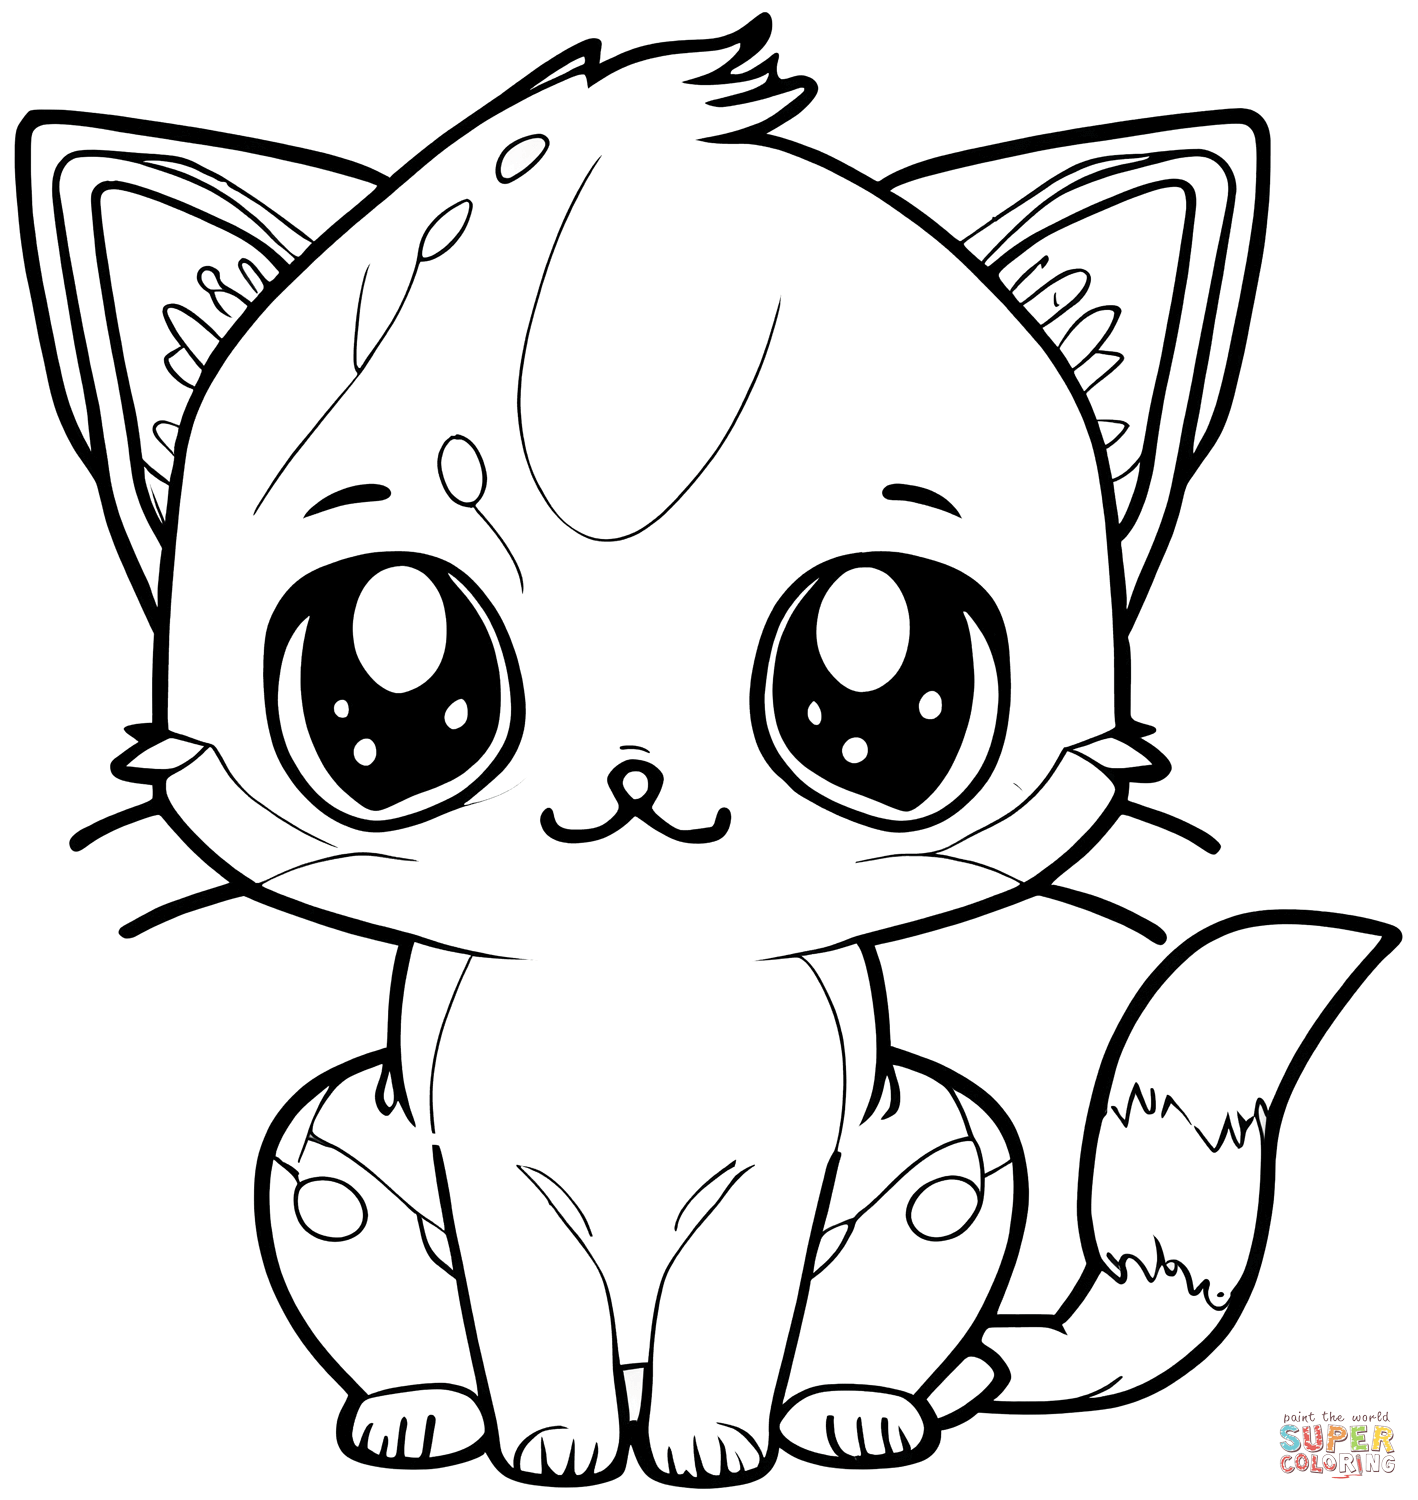 Adorable kitty cat coloring page free printable coloring pages